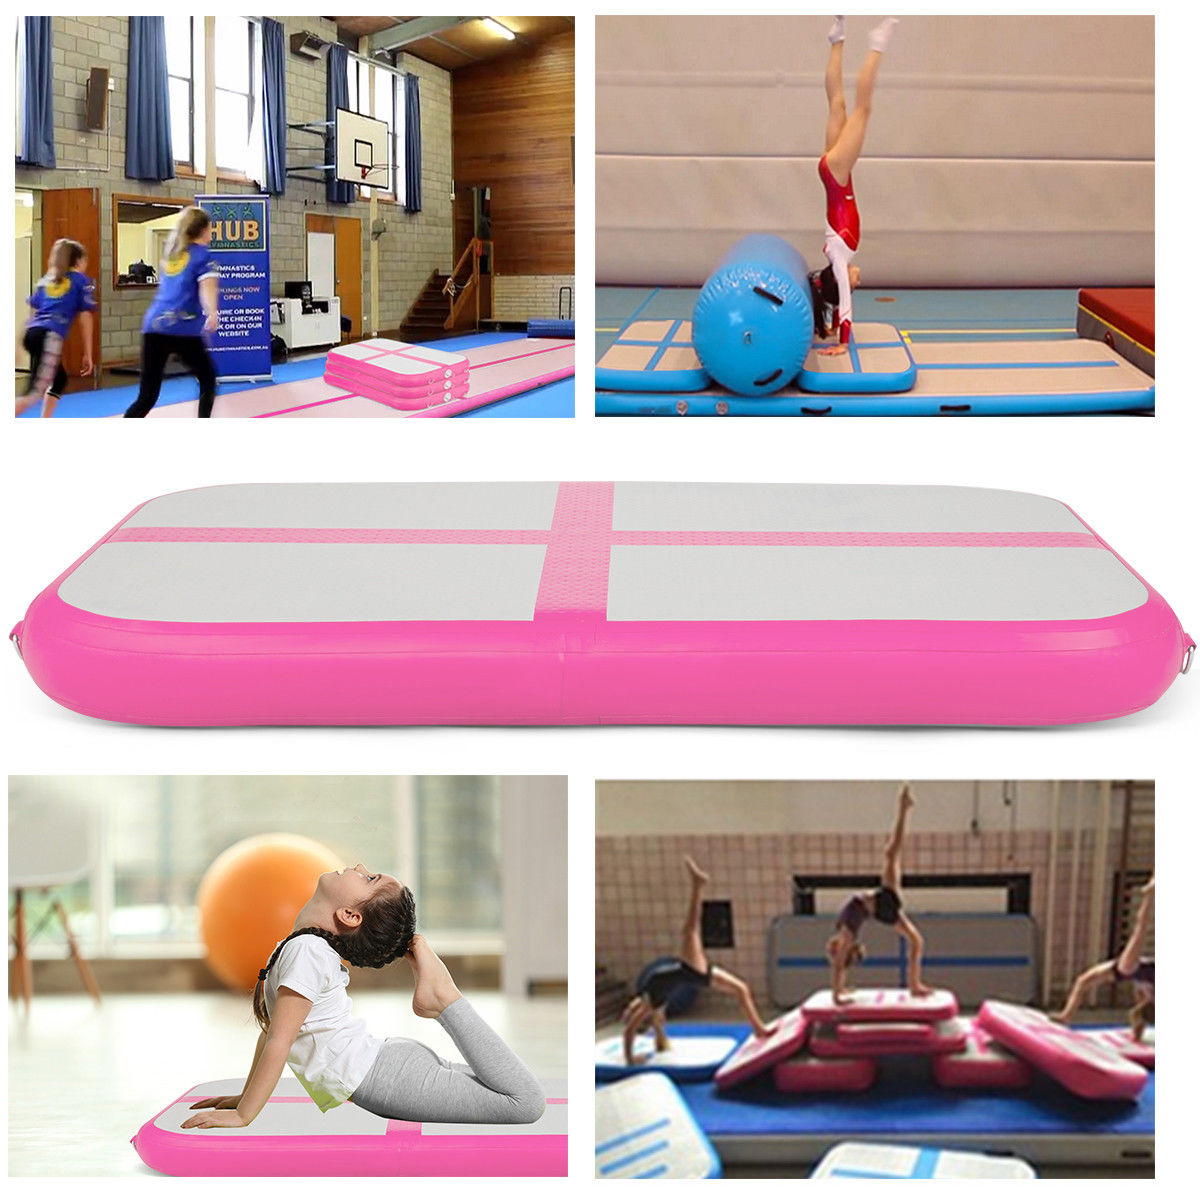 Tumbling and Martial Arts ¡­ 10ft/13ft/16.4ft/20ft/23ft air Track Tumbling mat 4/8 inches Thickness Inflatable Gymnastics airtrack with Electric Air Pump for Practice Gymnastics,Cheerleading Free Running Parkour 